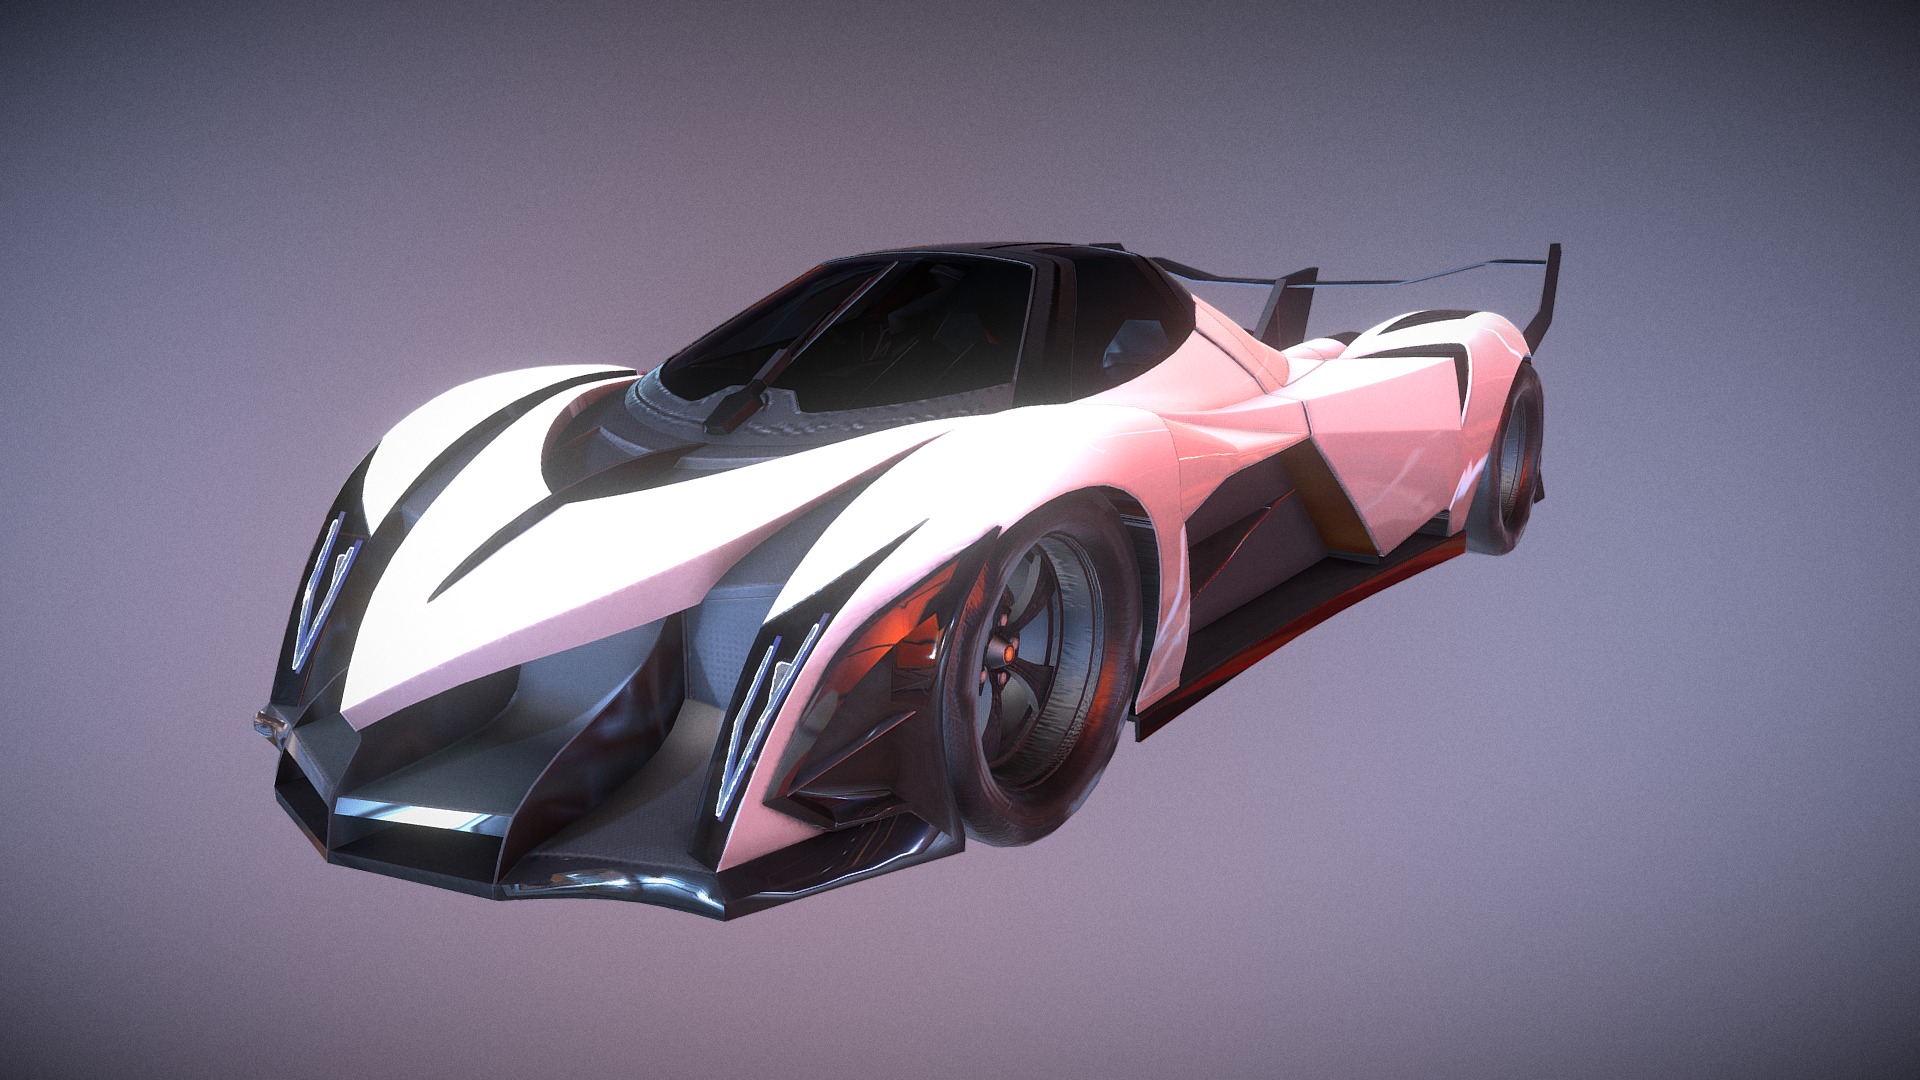 3D model Devel Sixteen Prototype Hypercar - This is a 3D model of the Devel Sixteen Prototype Hypercar. The 3D model is about a pink sports car.